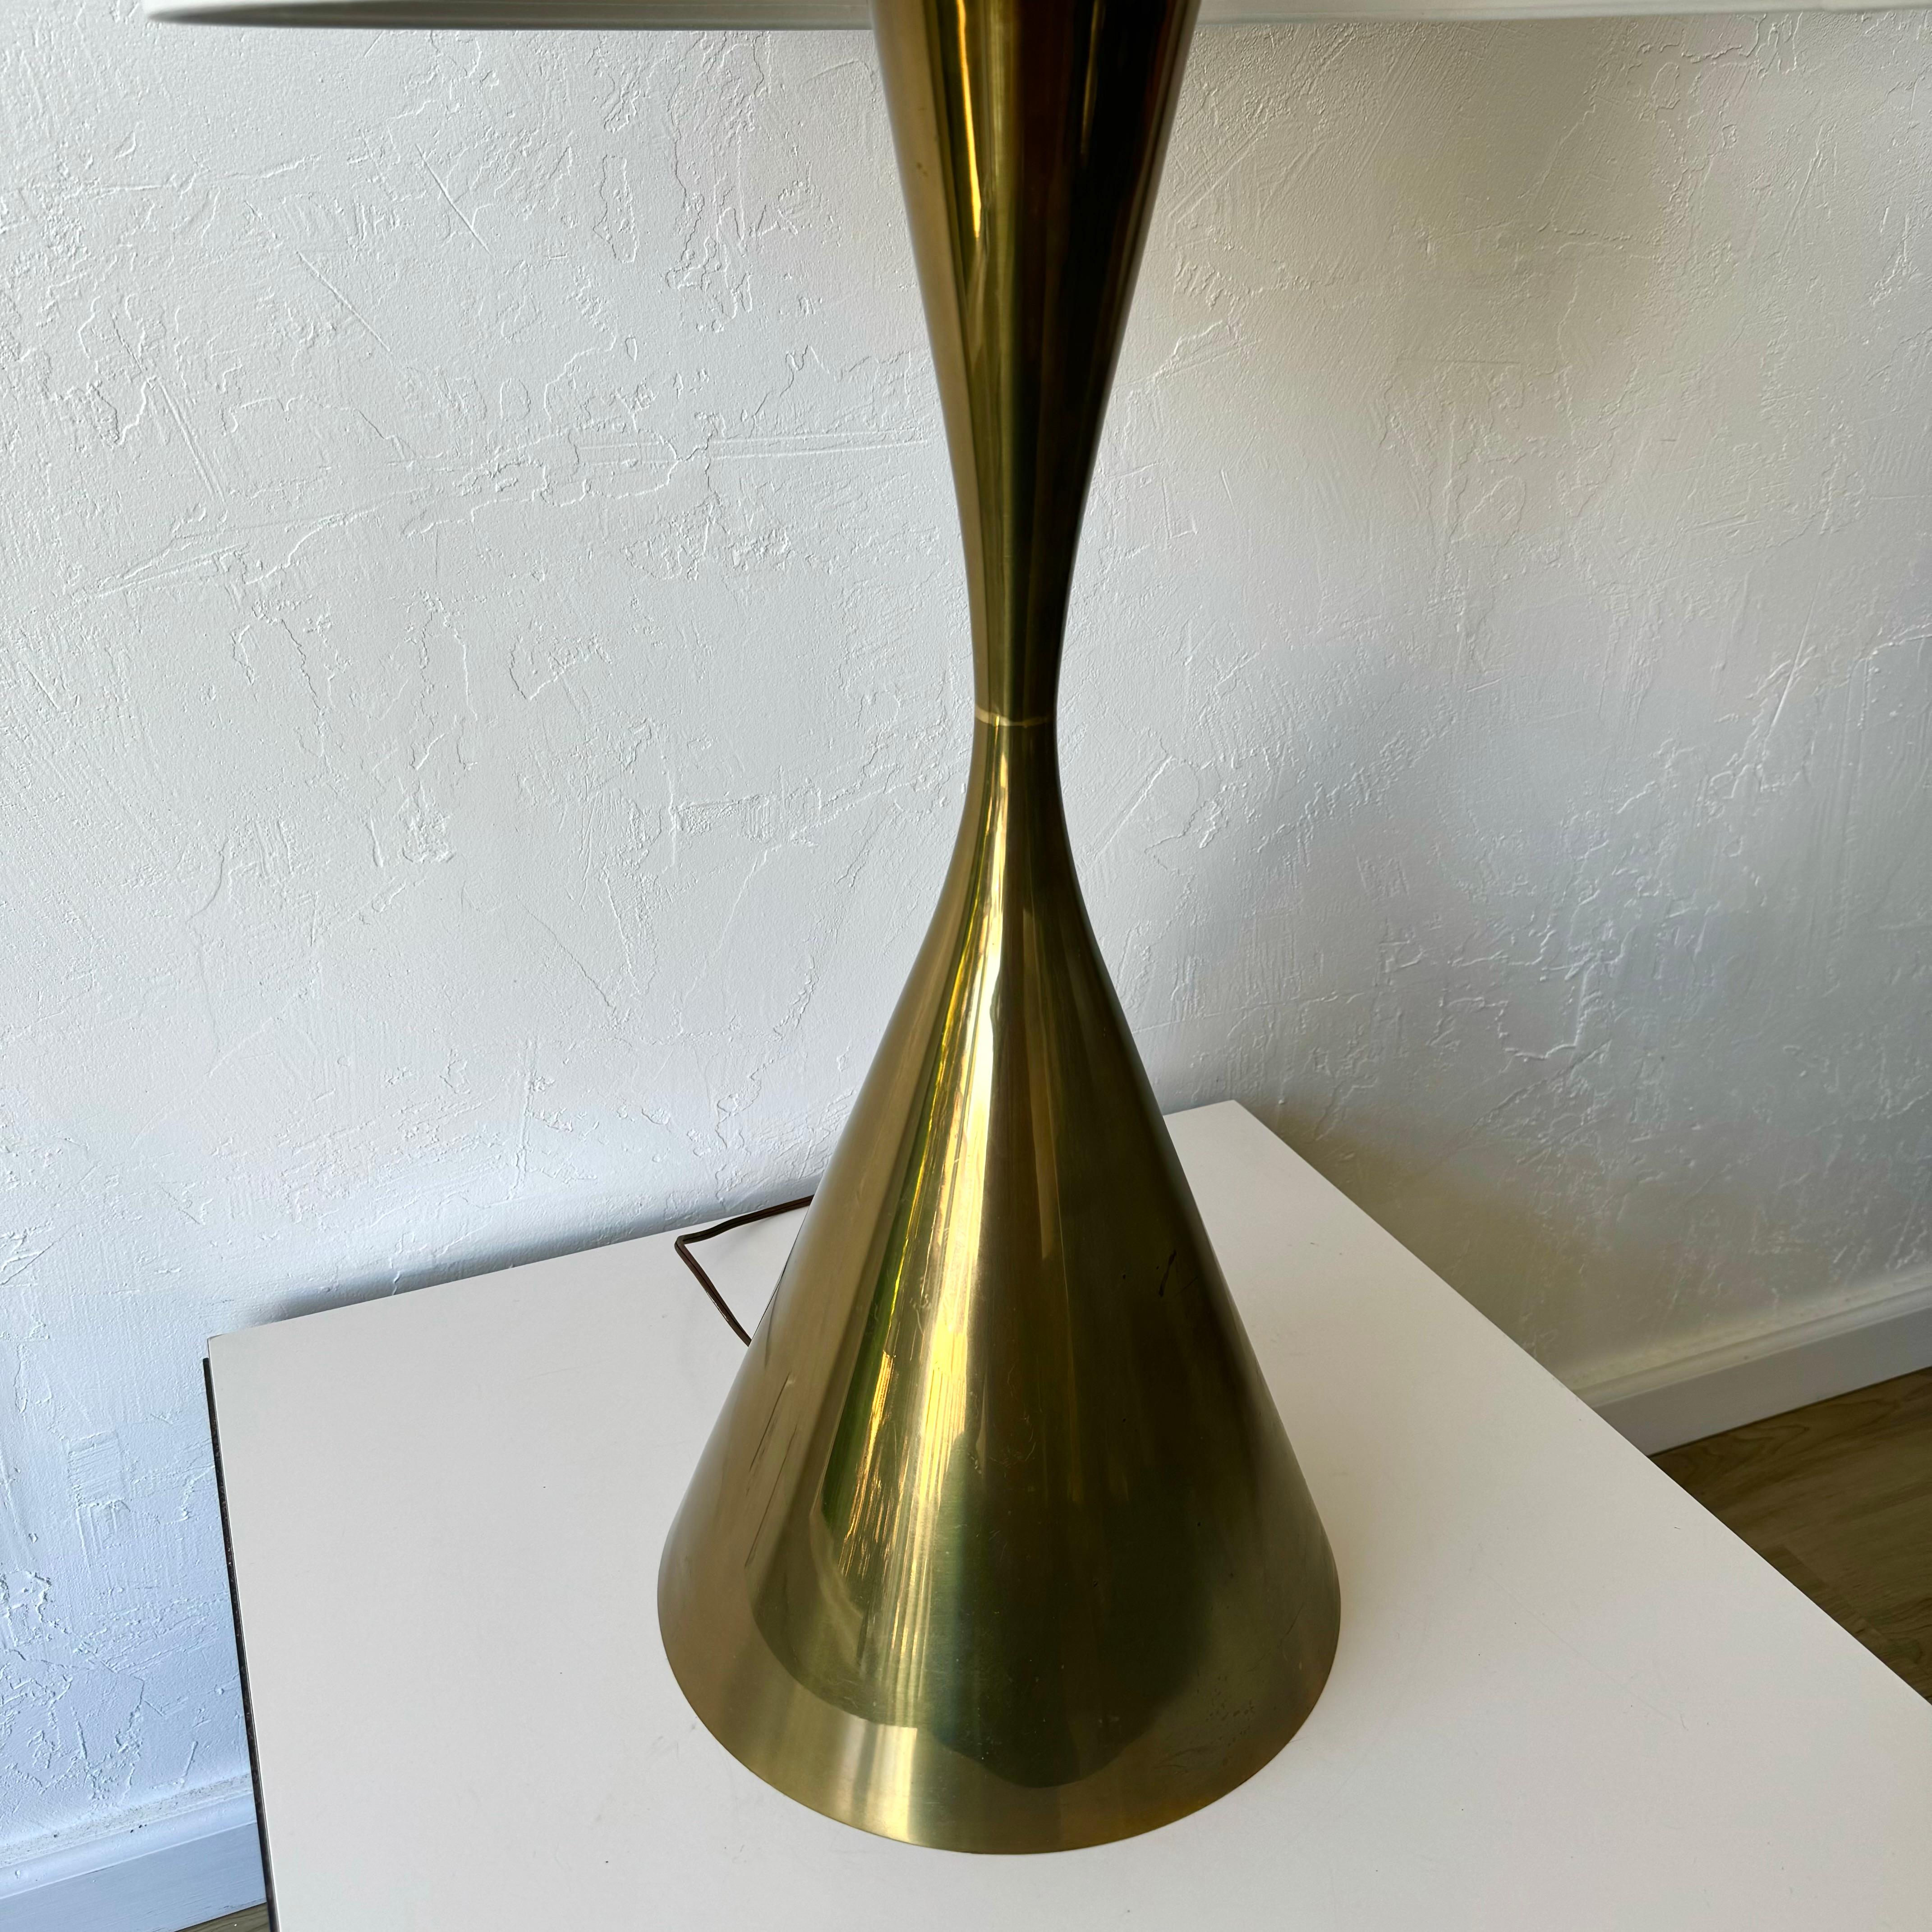 A fantastic solid brass hourglass lamp by Italian company Arredoluce. Presented in its oiriginal condition. Italian lighting design is and was some of the best the world has seen. I think the 1950’s and 60’s periods of Arredoluce are some of those